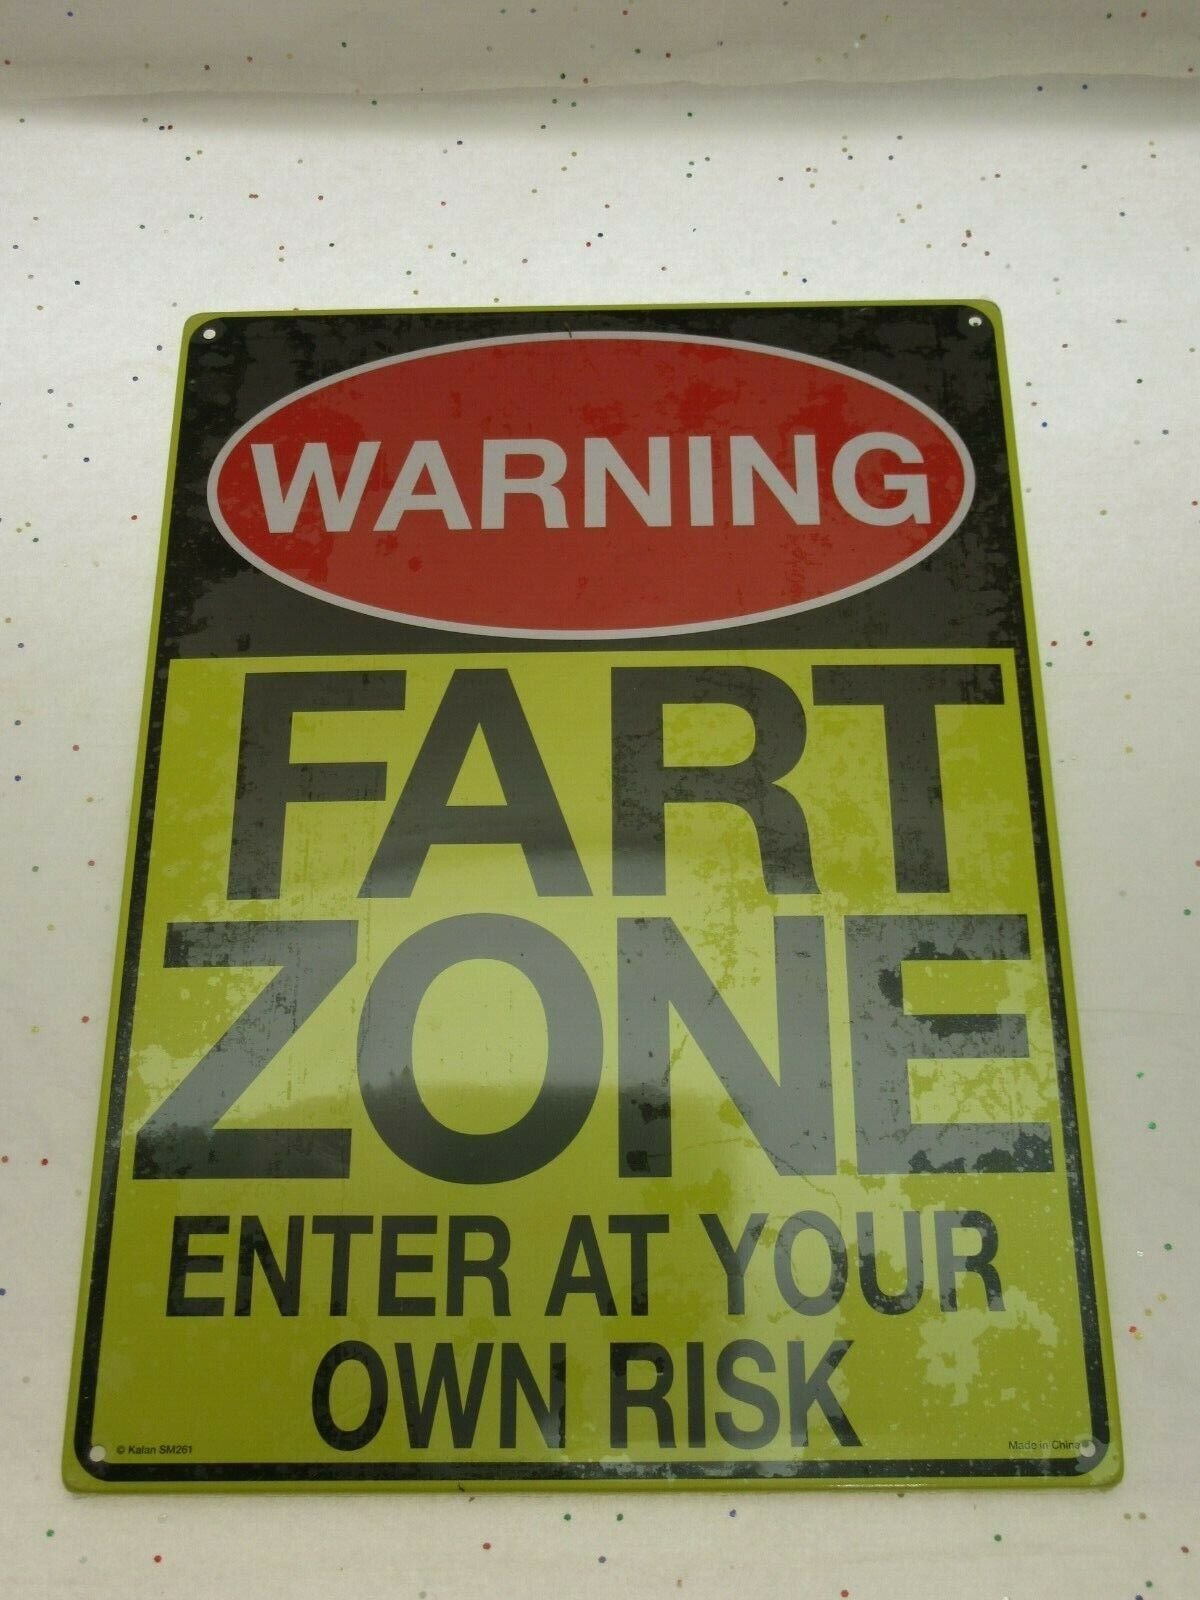 WARNING Fart Zone Enter At Your Own Risk 8 x 11 inch Sign Door Wall Decor